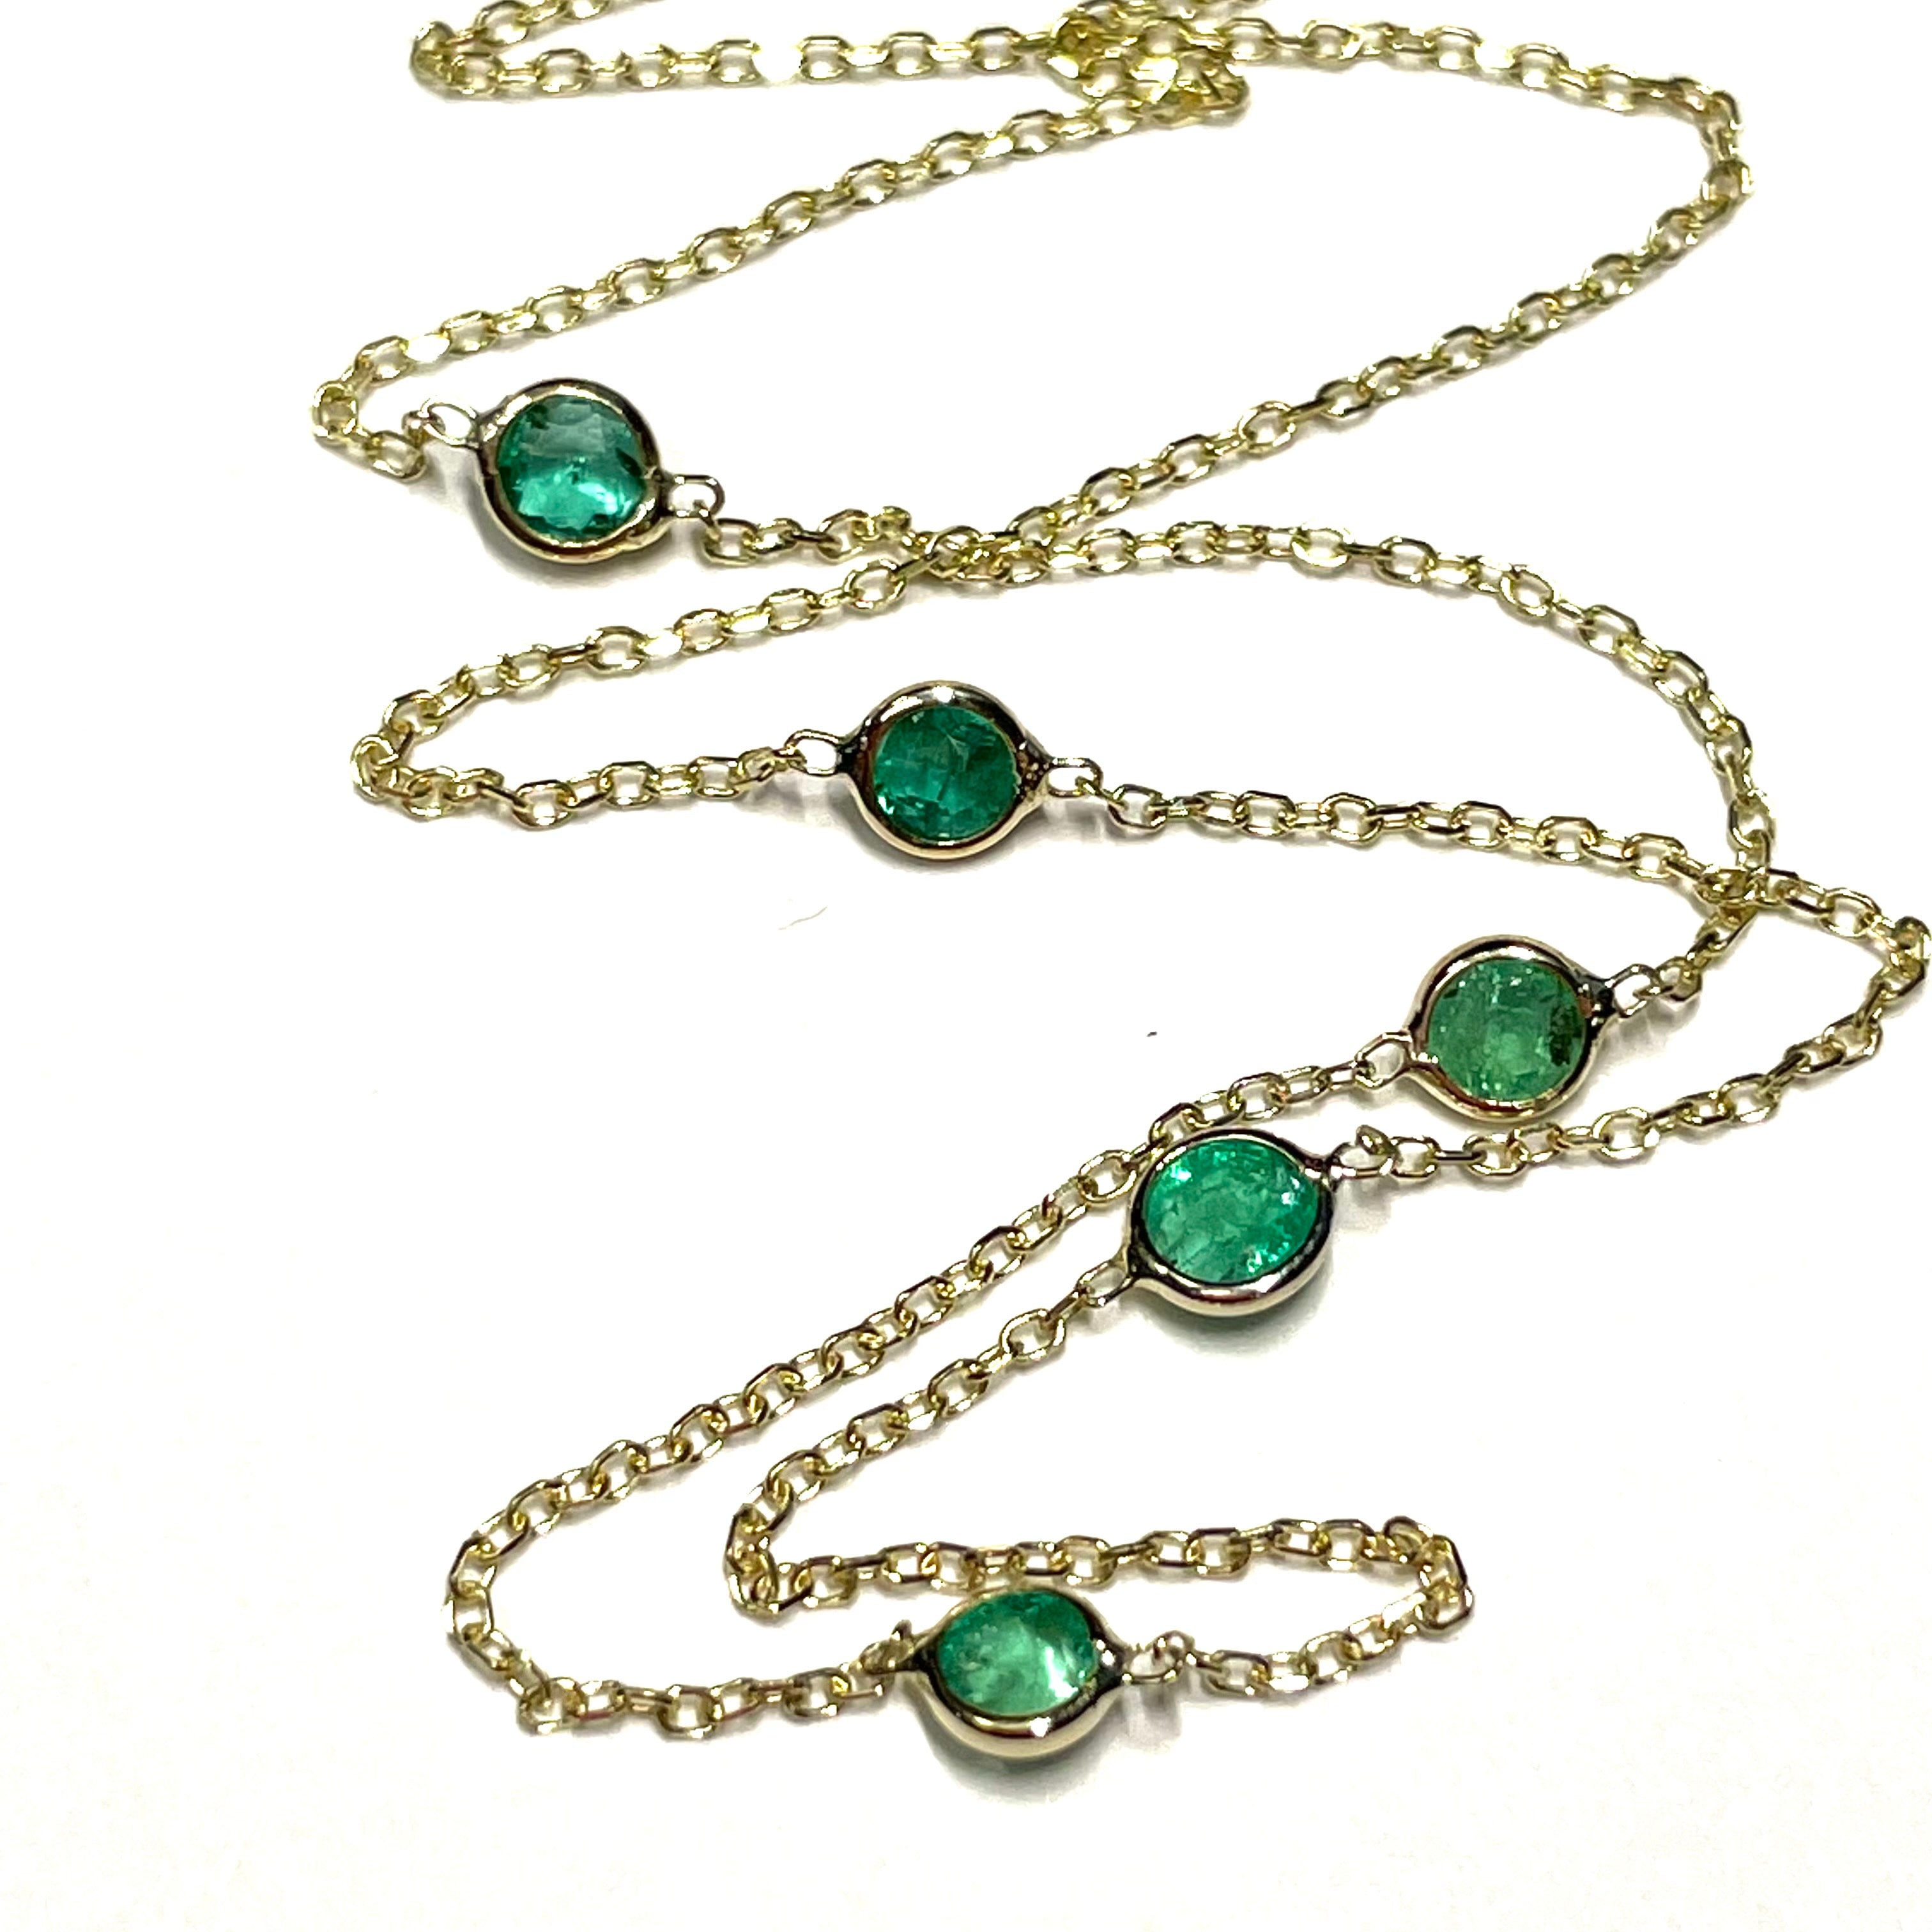 16" 14k Yellow Gold Five Emerald Necklace